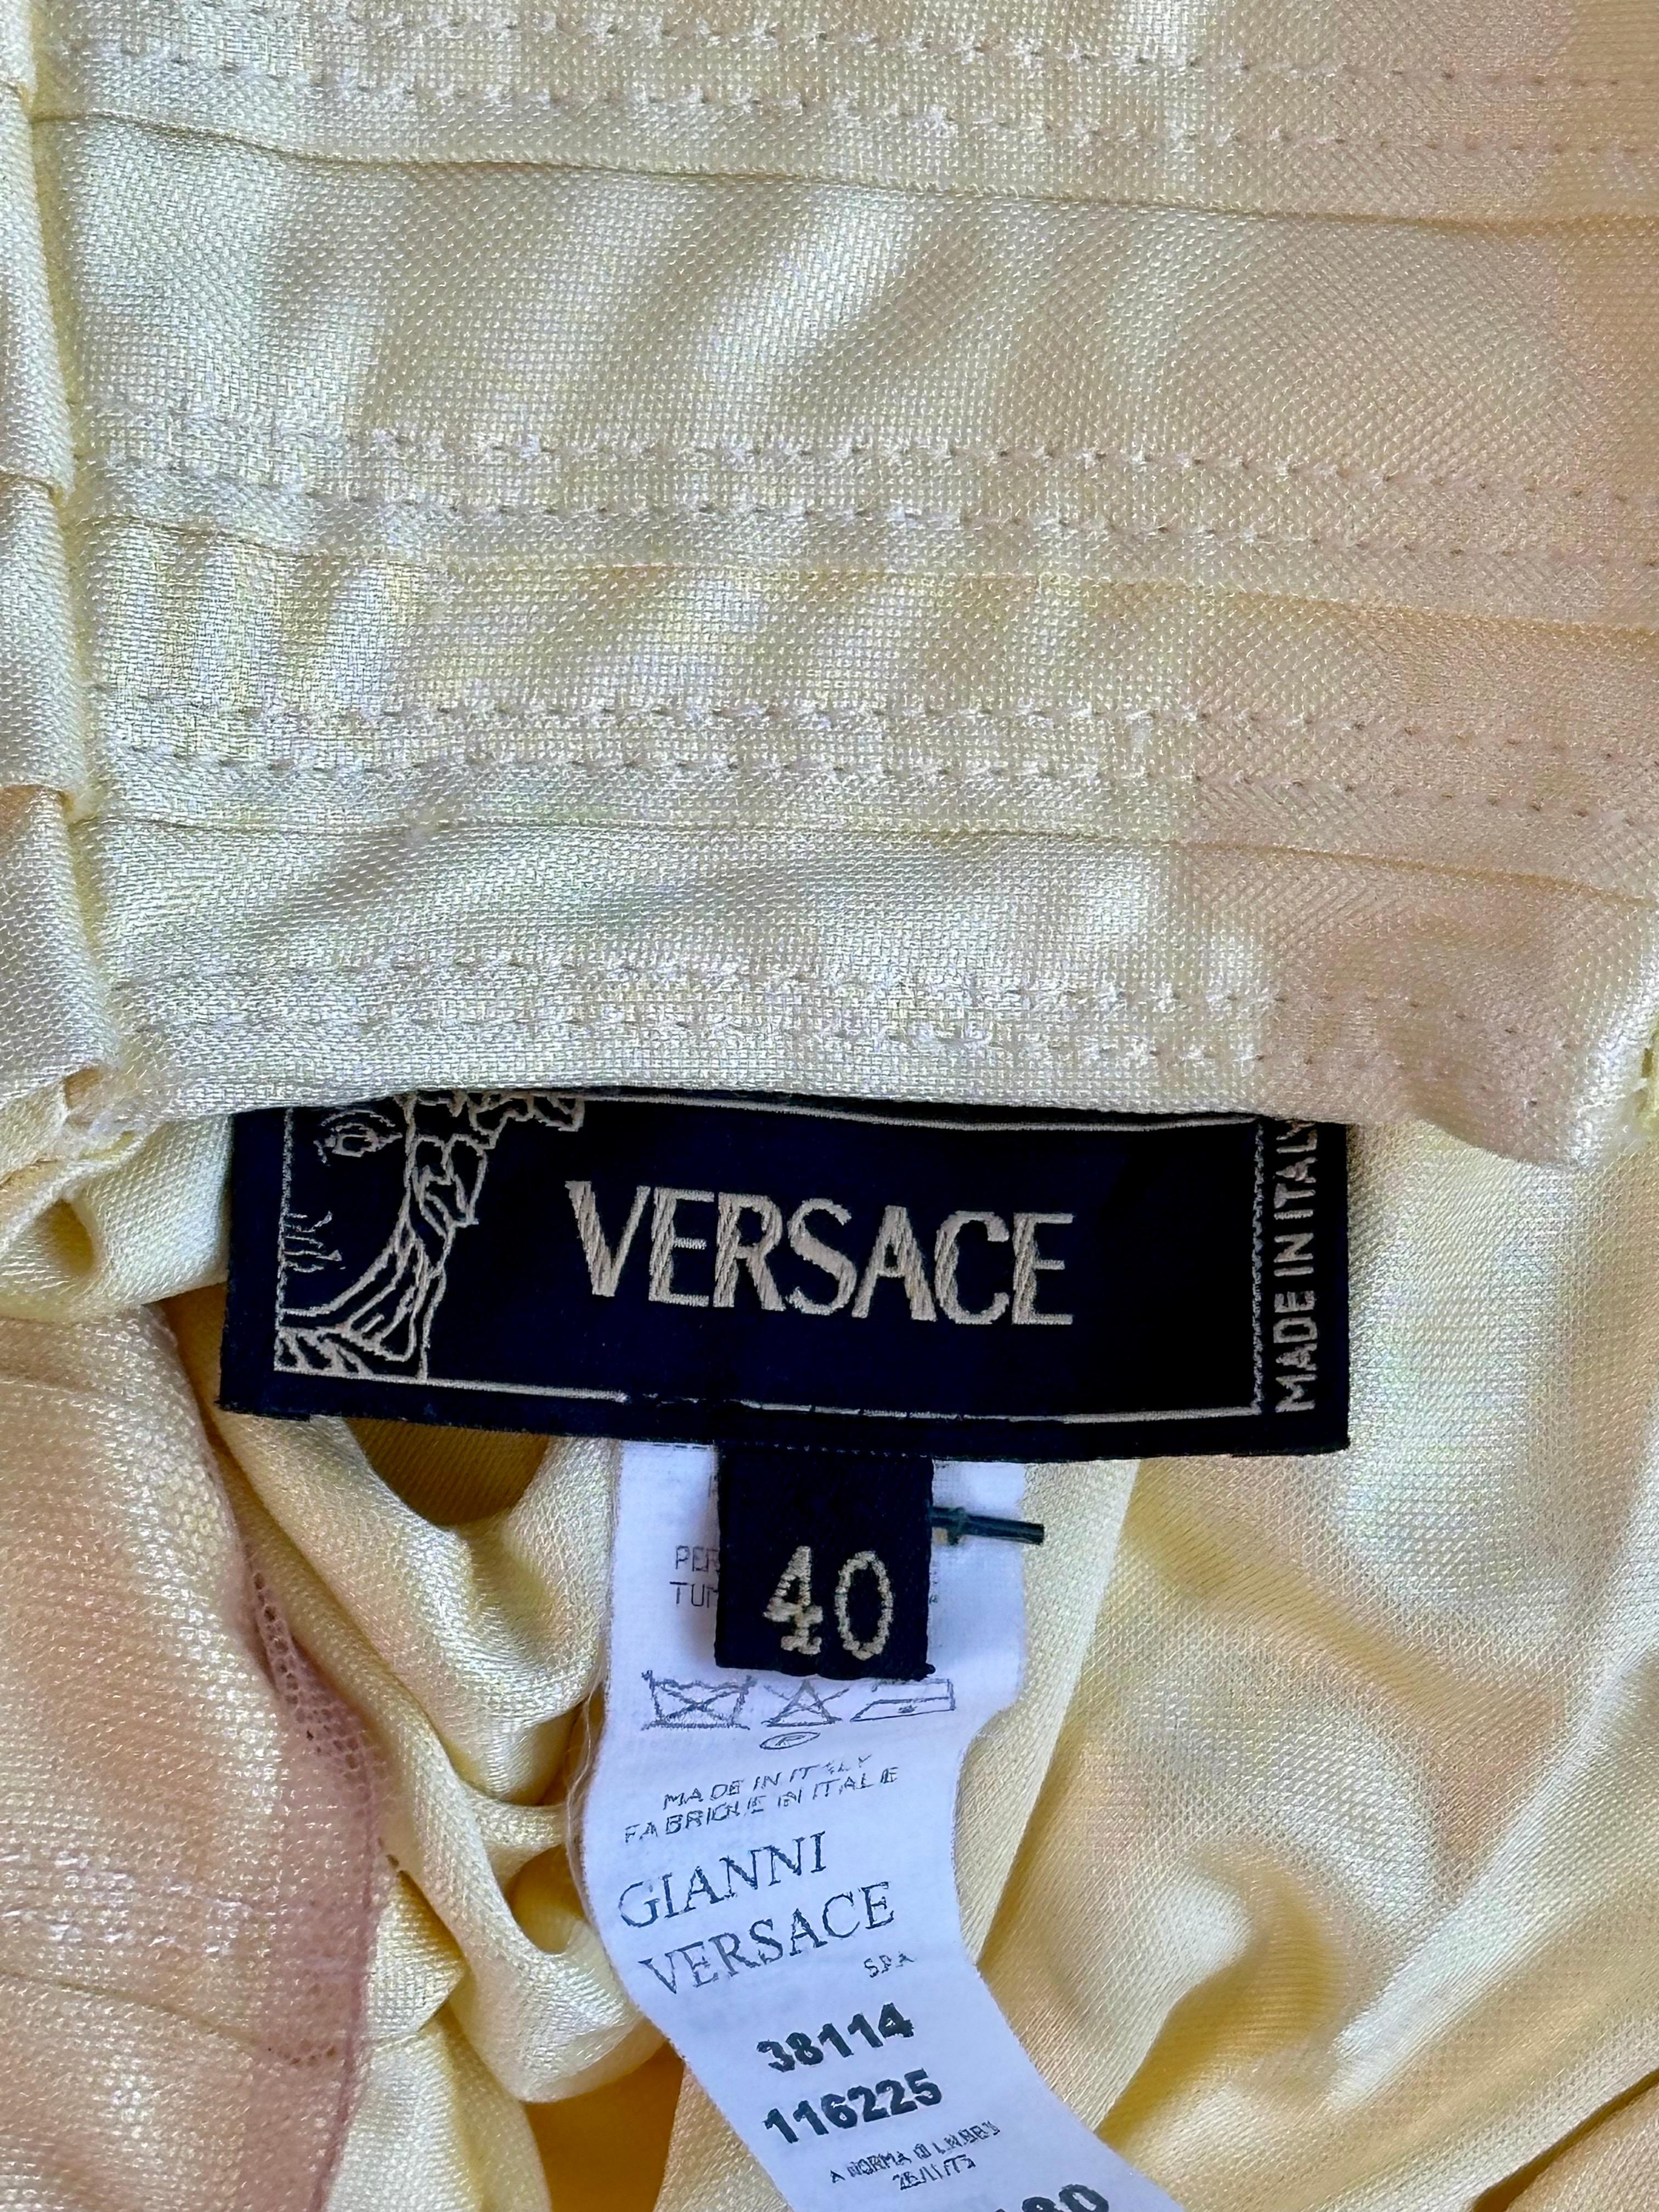 Versace S/S 2005 Runway Plunging Hi-Low Ruched Open Back Evening Dress Gown For Sale 7